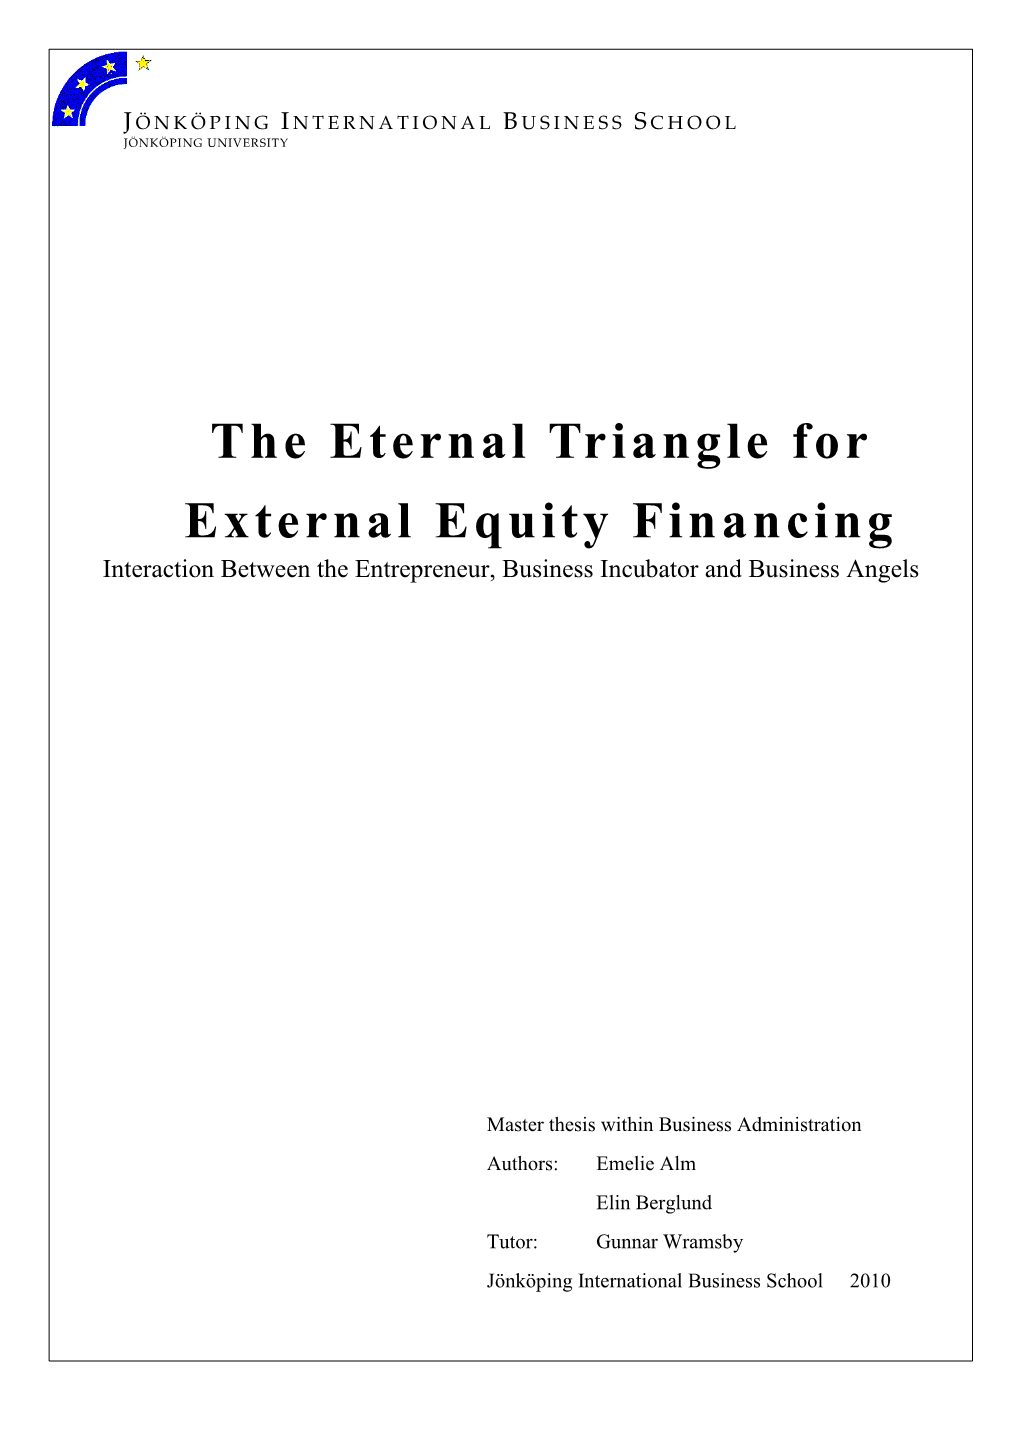 The Eternal Triangle for External Equity Financing Interaction Between the Entrepreneur, Business Incubator and Business Angels